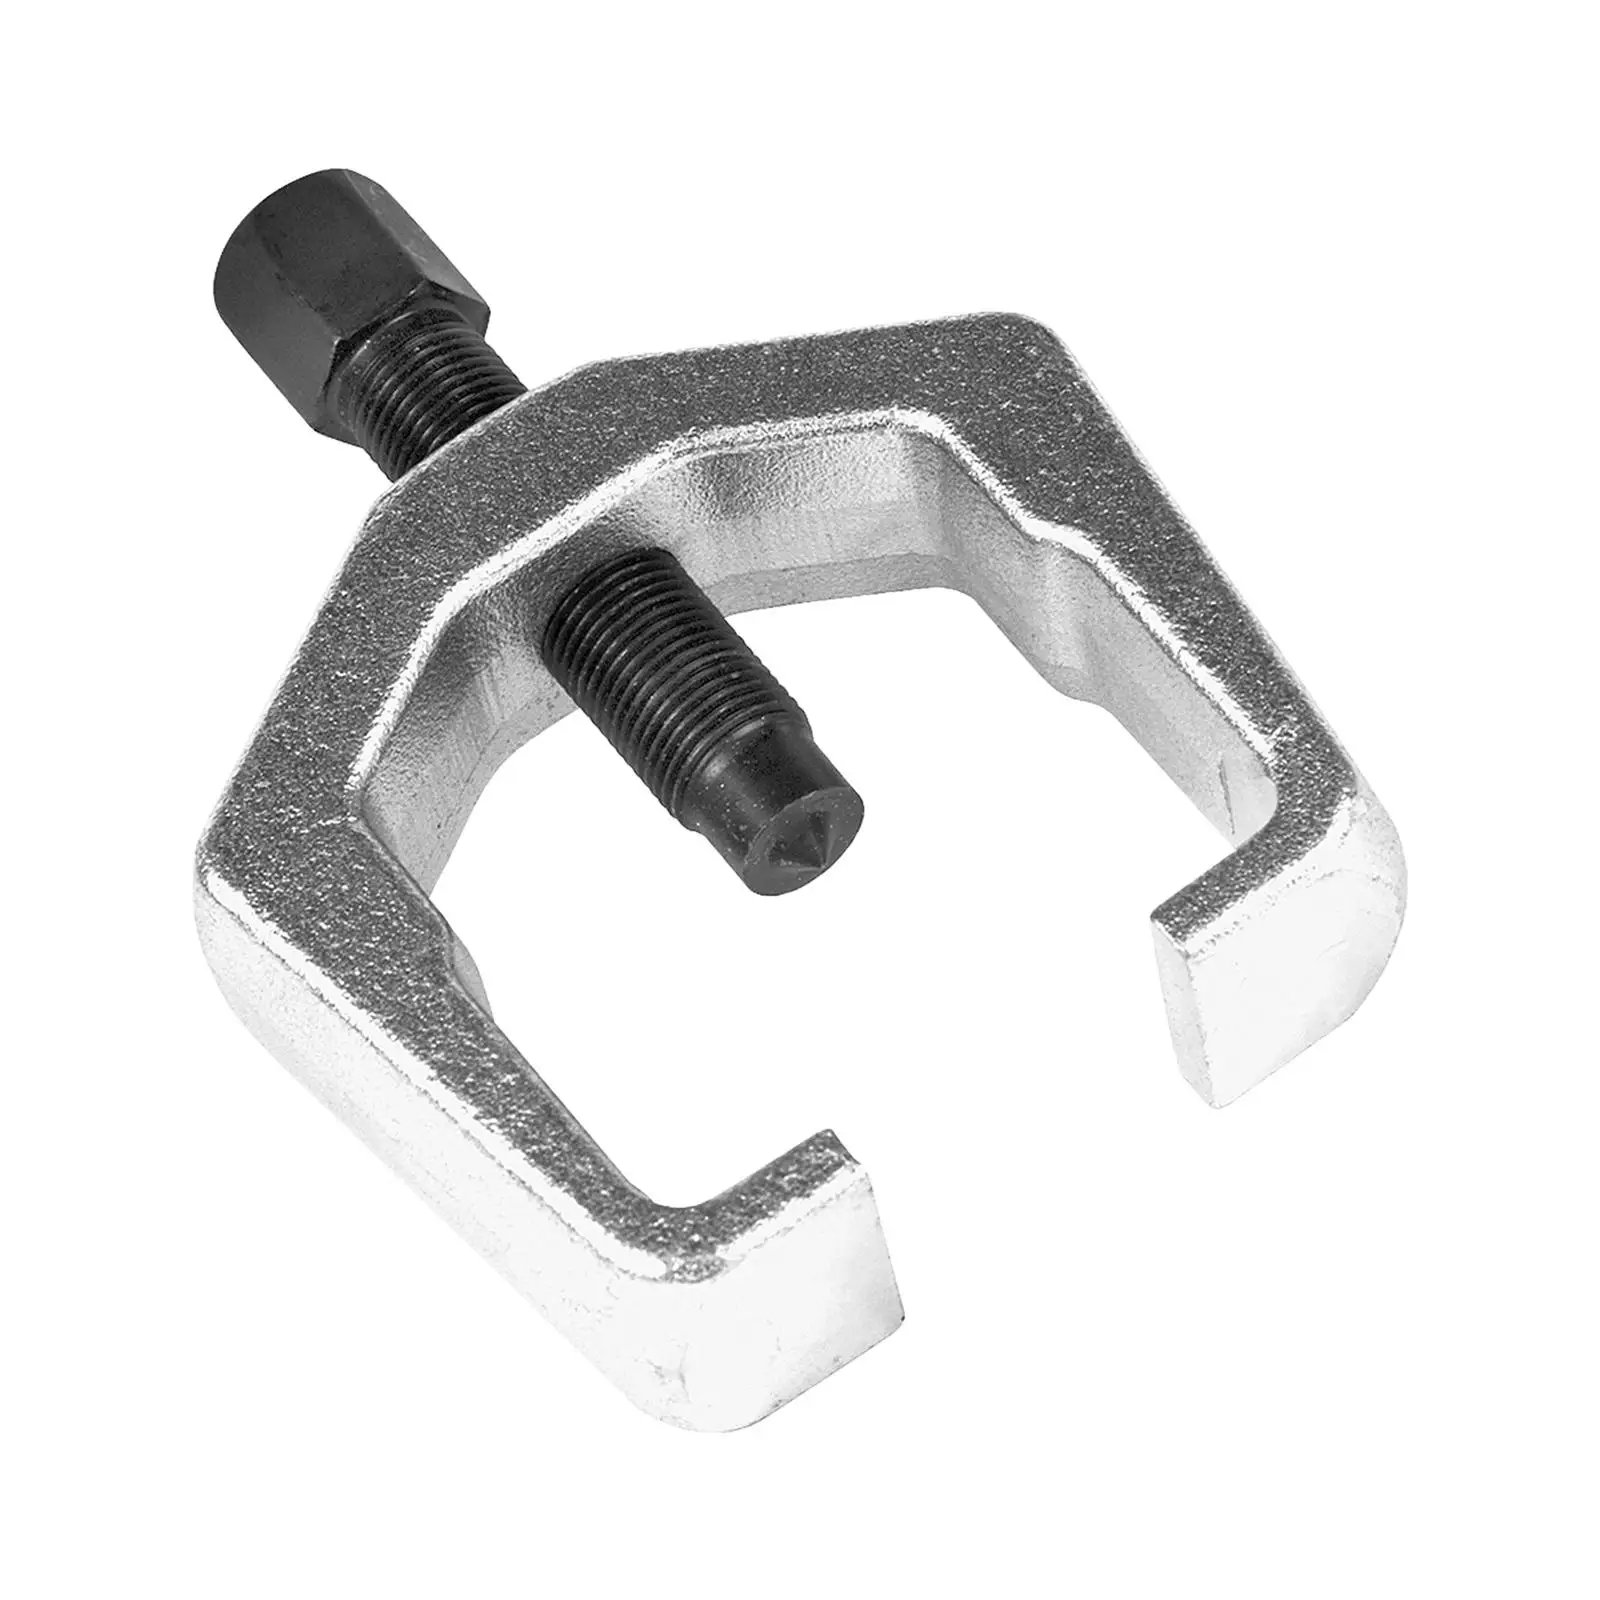 Slack Adjuster Puller Easy to Operate Durable Heavy Duty Pulley Puller Tool